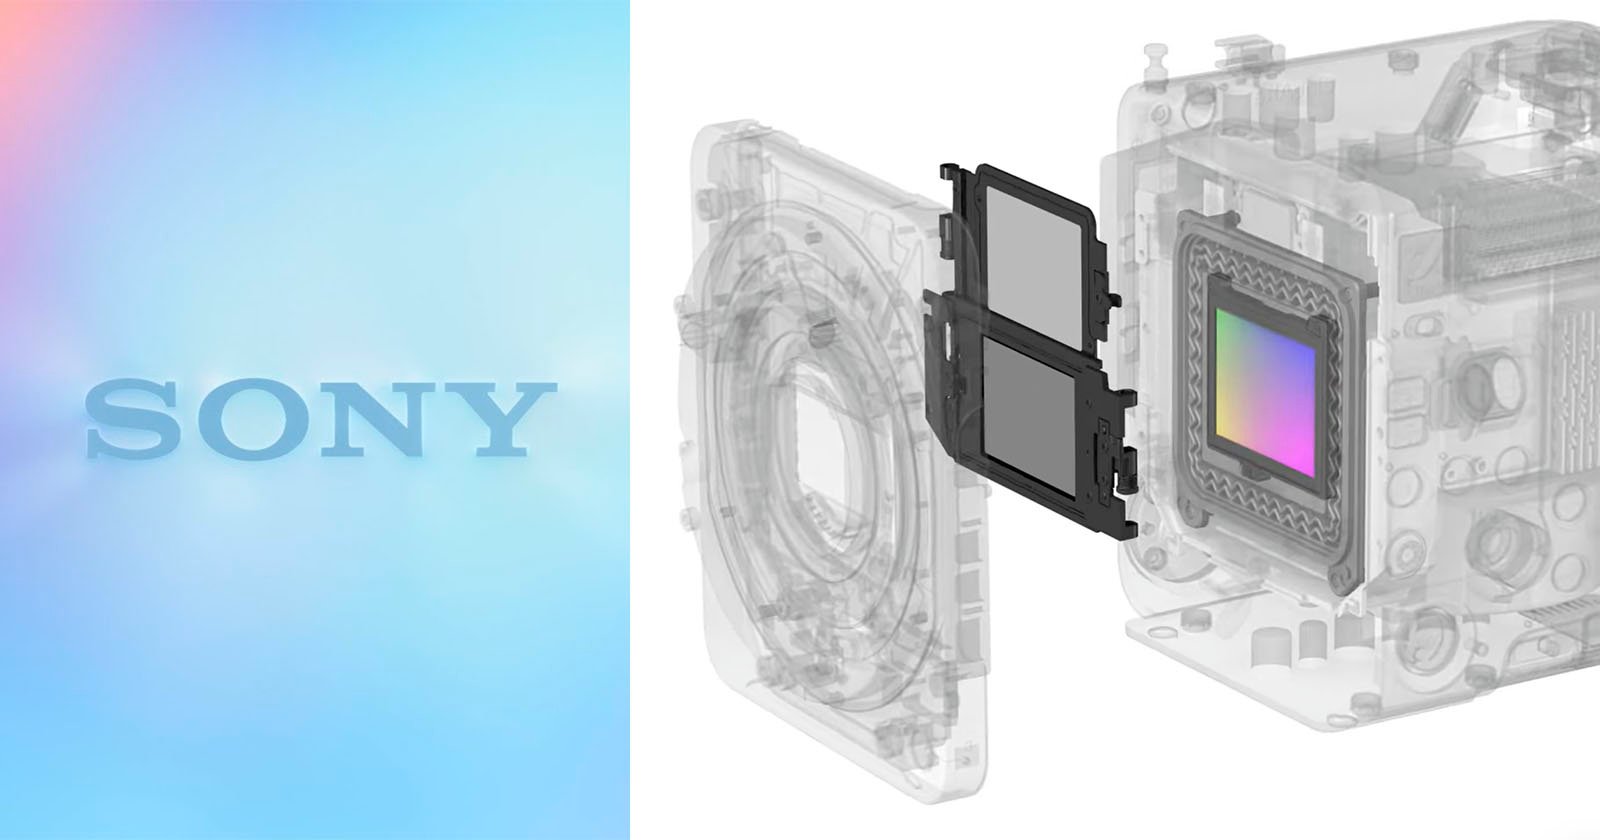 A semi-transparent Sony camera displays its internal sensor mechanism on the right side of the image. On the left side, there's a blue gradient background with the Sony logo. The camera's inner components appear detailed and technical.